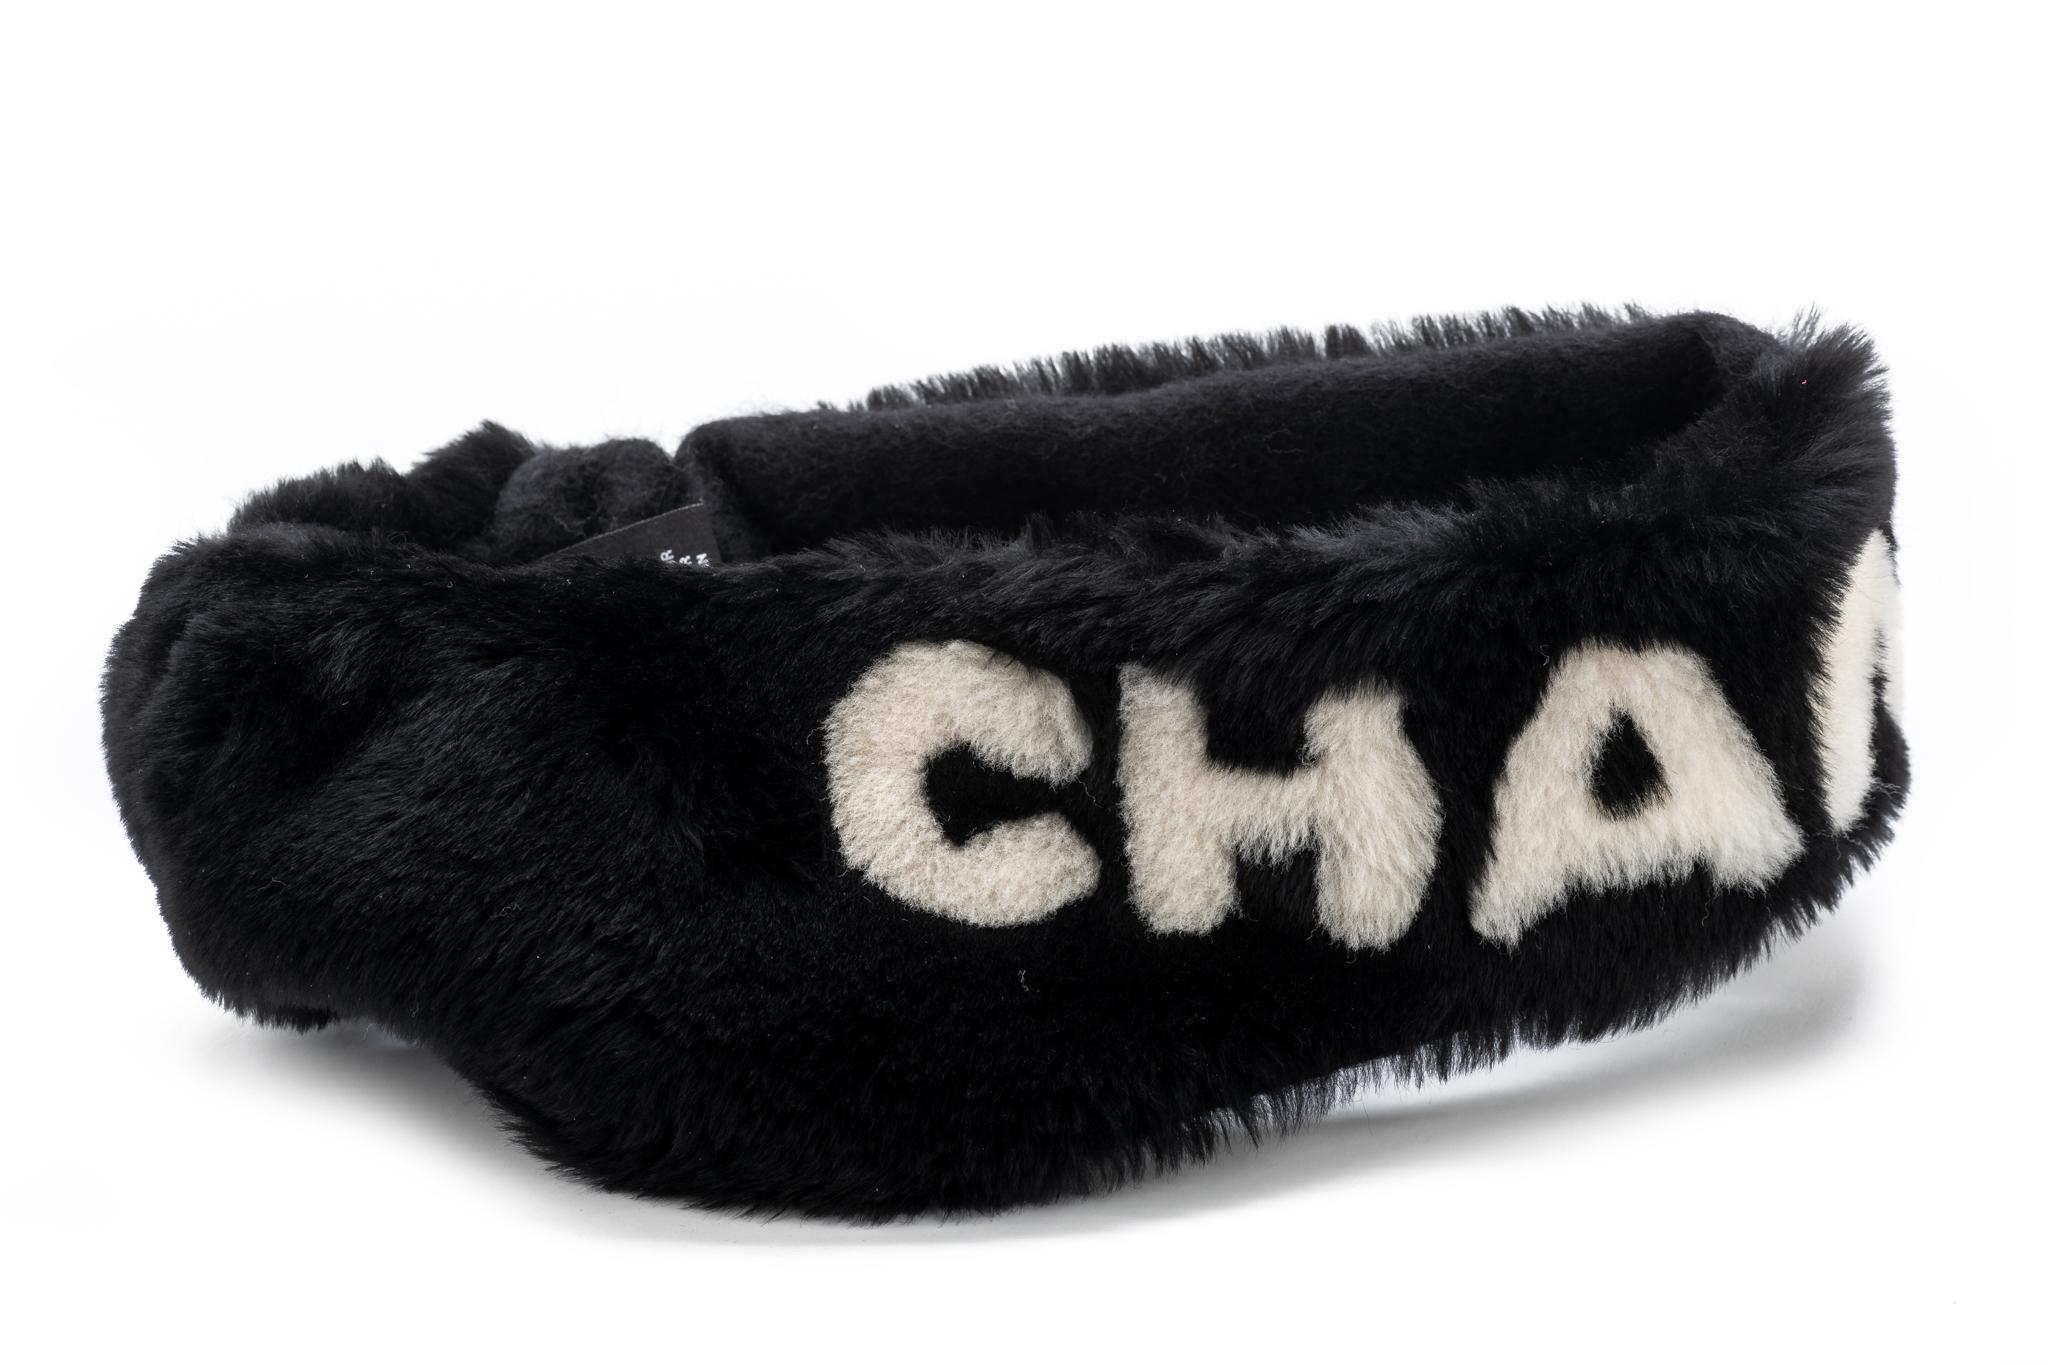 Chanel collectible and iconic black shearling headband with Chanel writing in white. Cashmere interior. Stretchy. Comes with original dust cover .